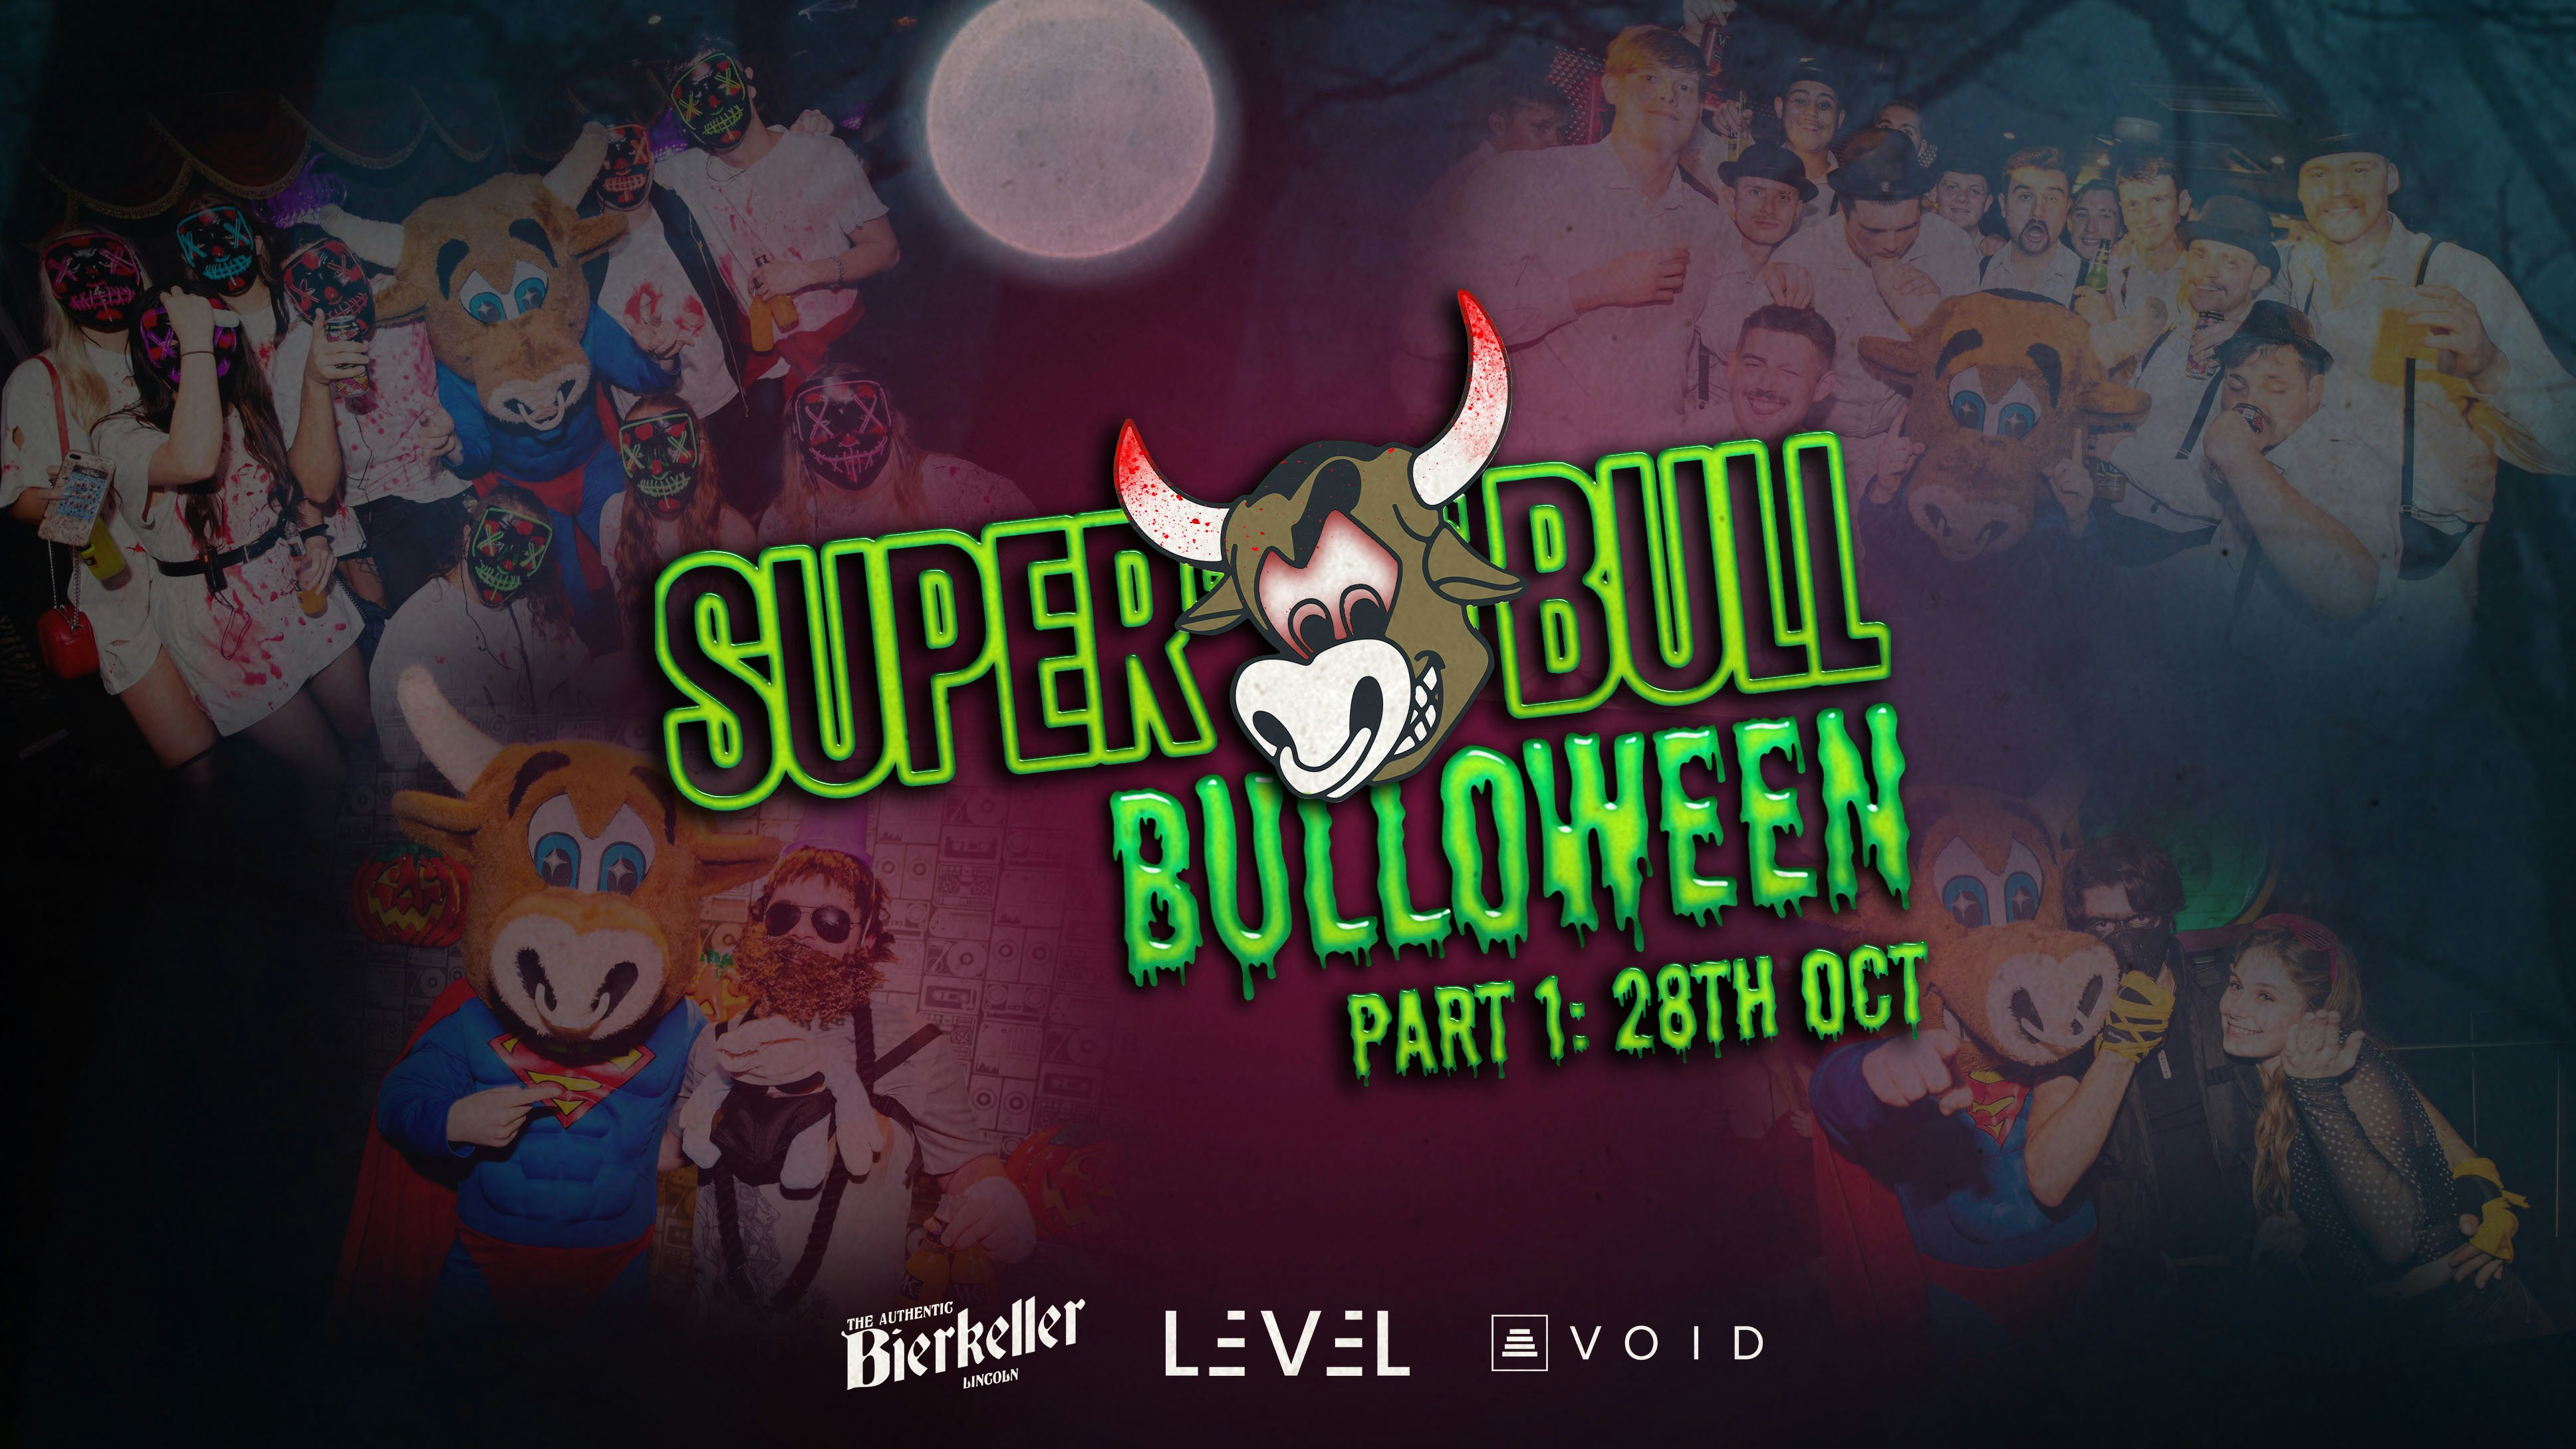 THE SUPERBULL PRESENTS BULLOWEEN PART 1 – SPACES ON THE DOOR FROM 22:00PM